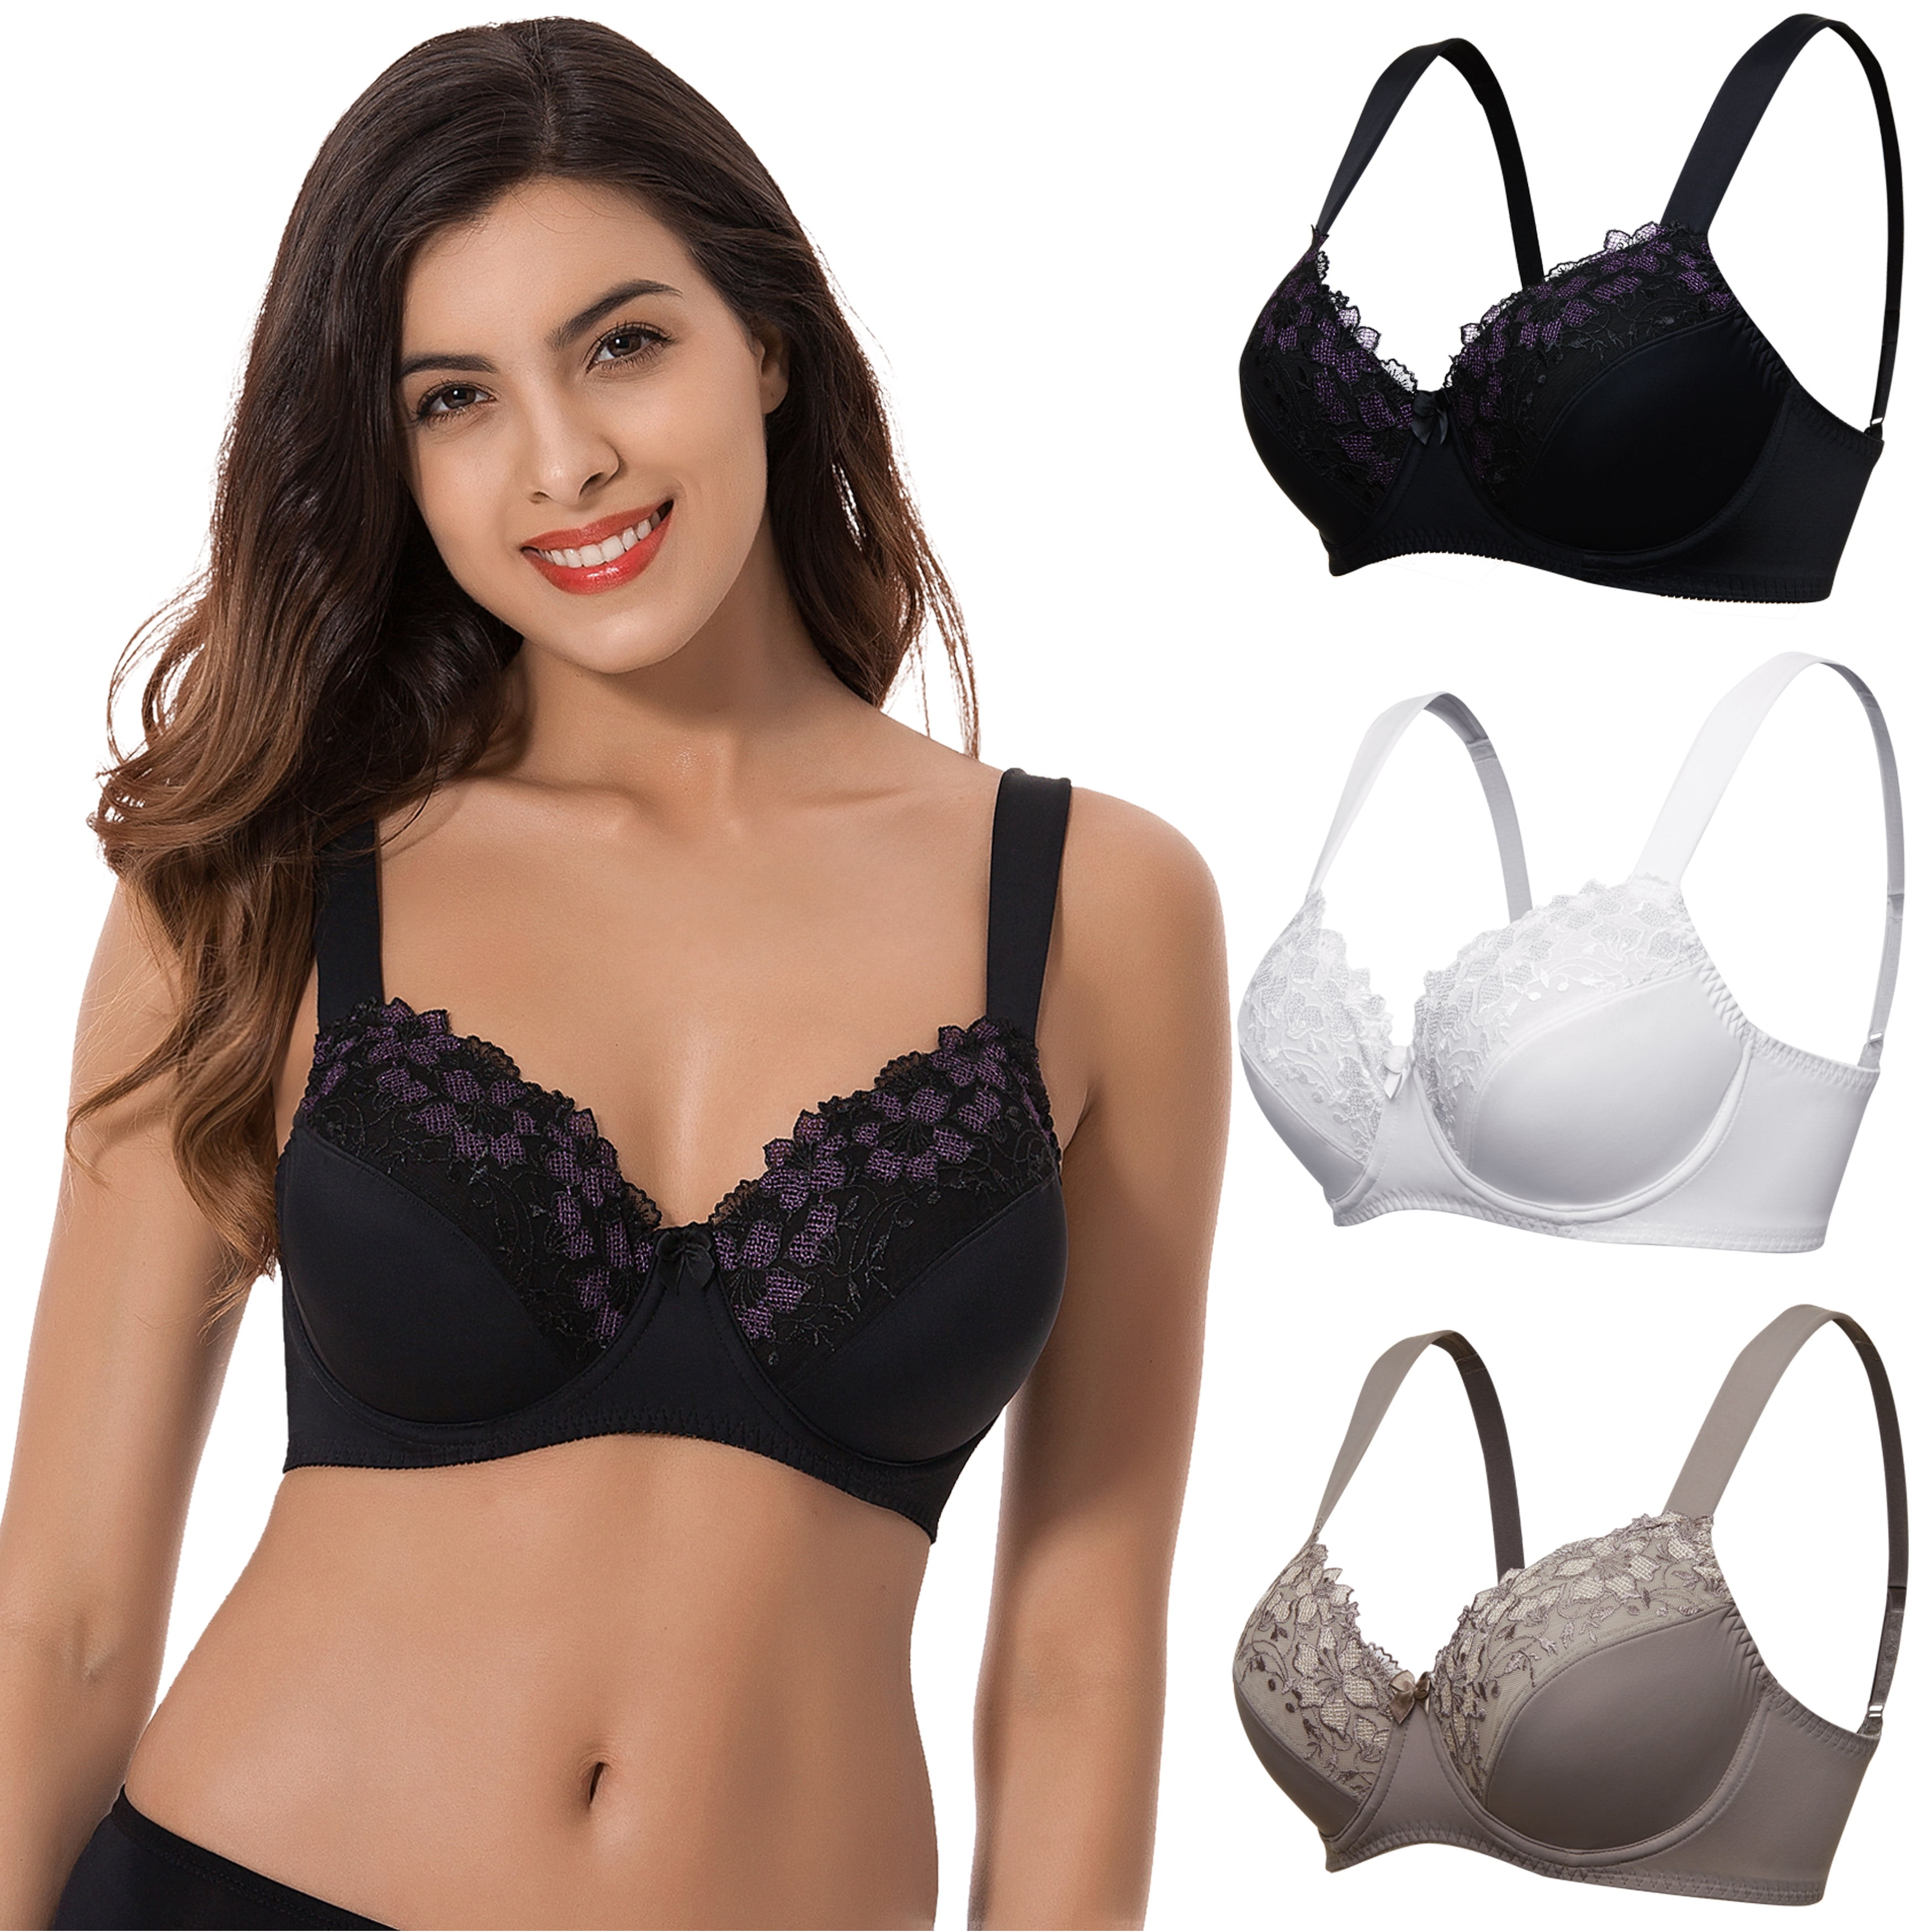 Curve Muse Plus Size Minimizer Underwire Unlined Bras with Embroidery Lace-3Pack 